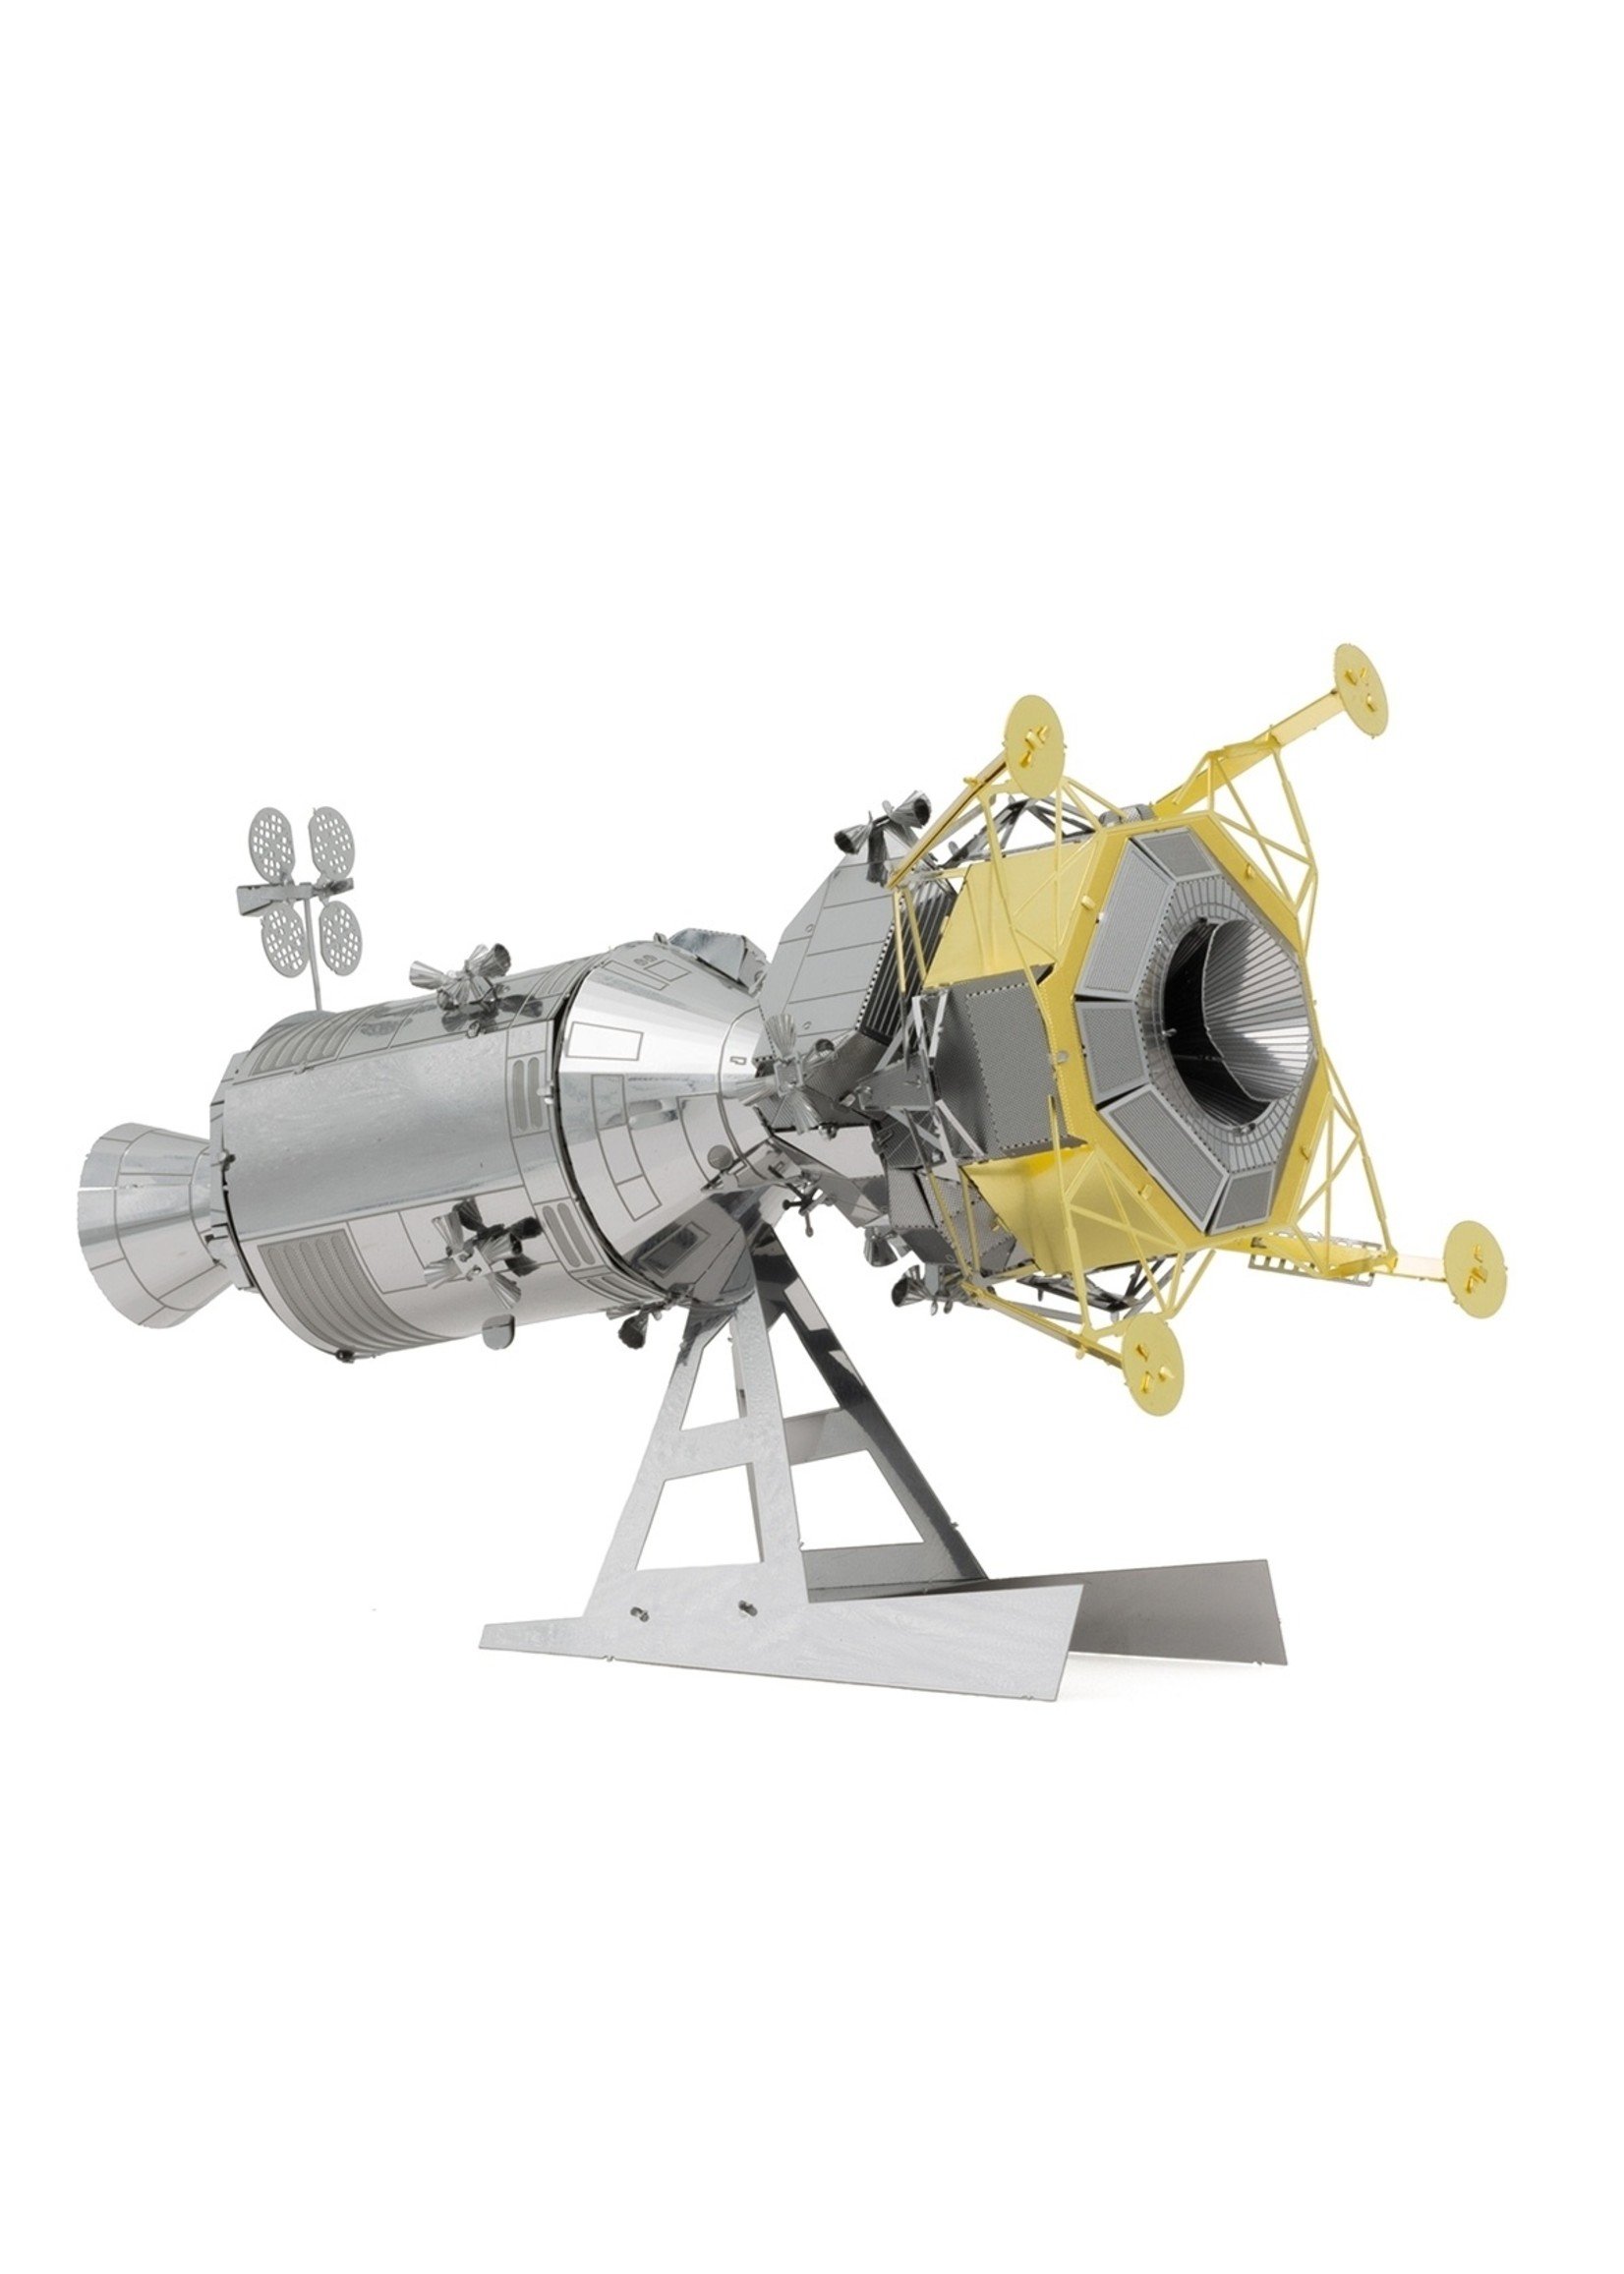 Fascinations Metal Earth - Apollo CSM with LM